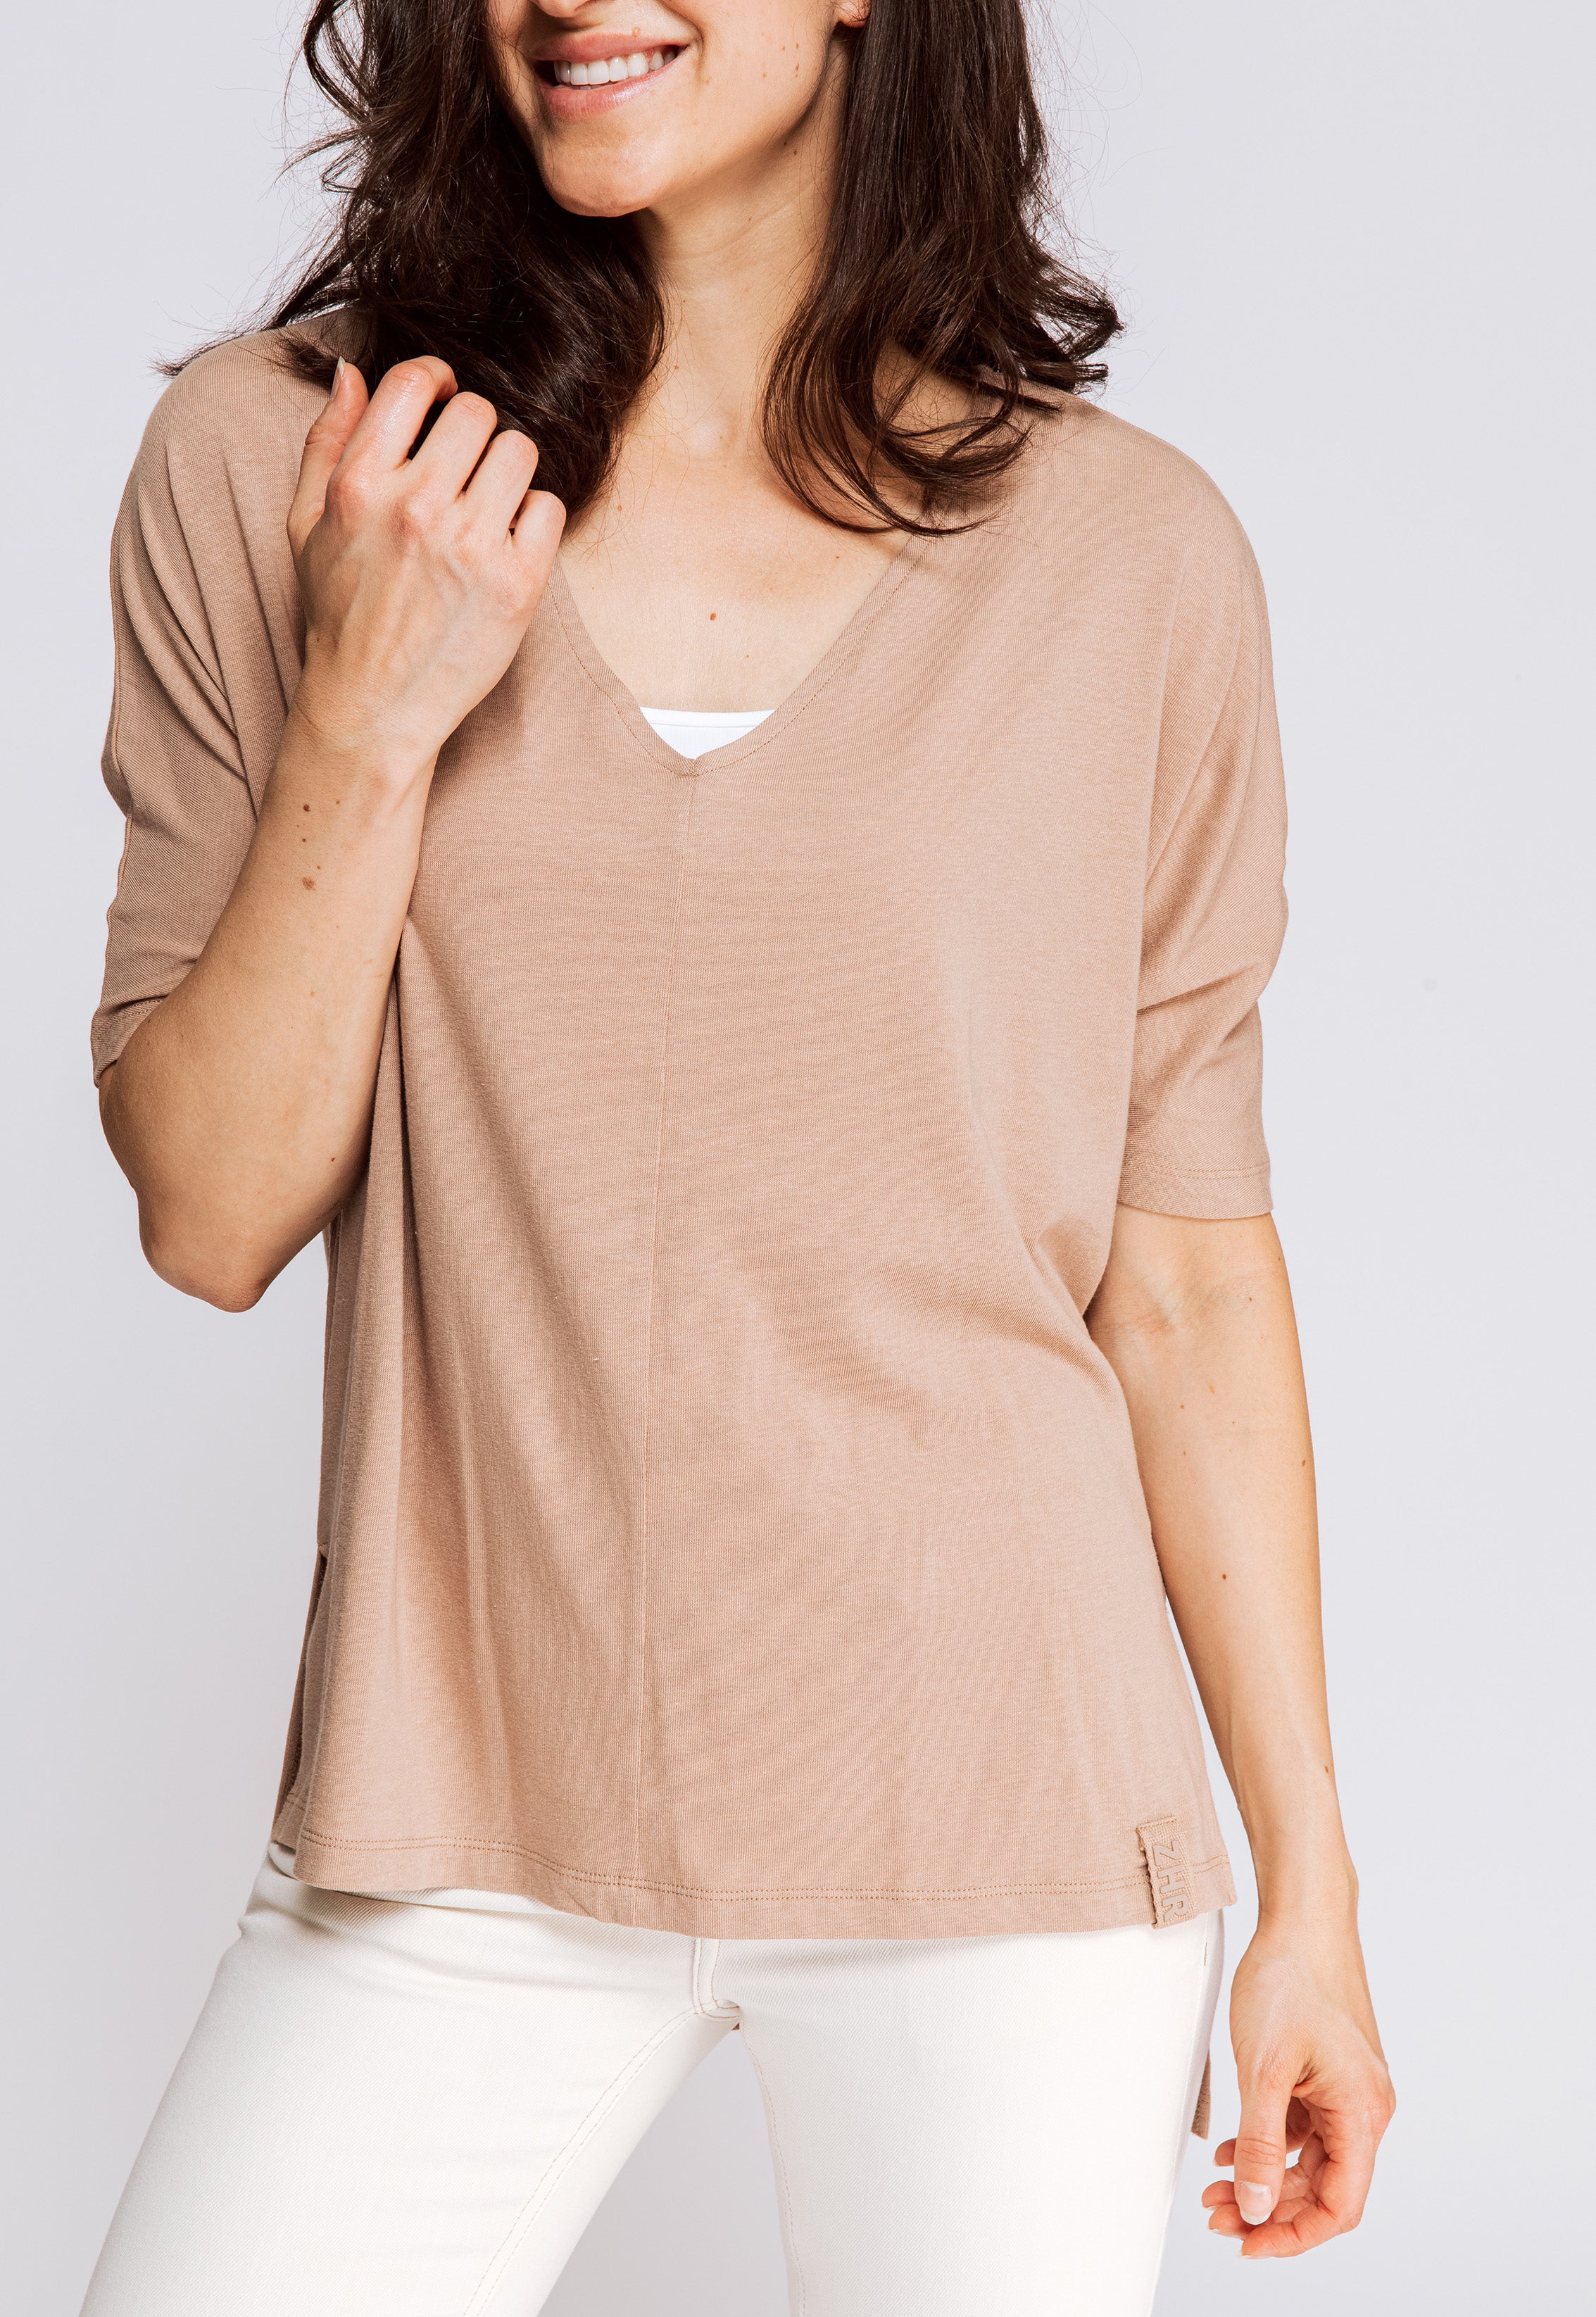 Zhrill T-Shirt Marit taupe – TrendVille | T-Shirts